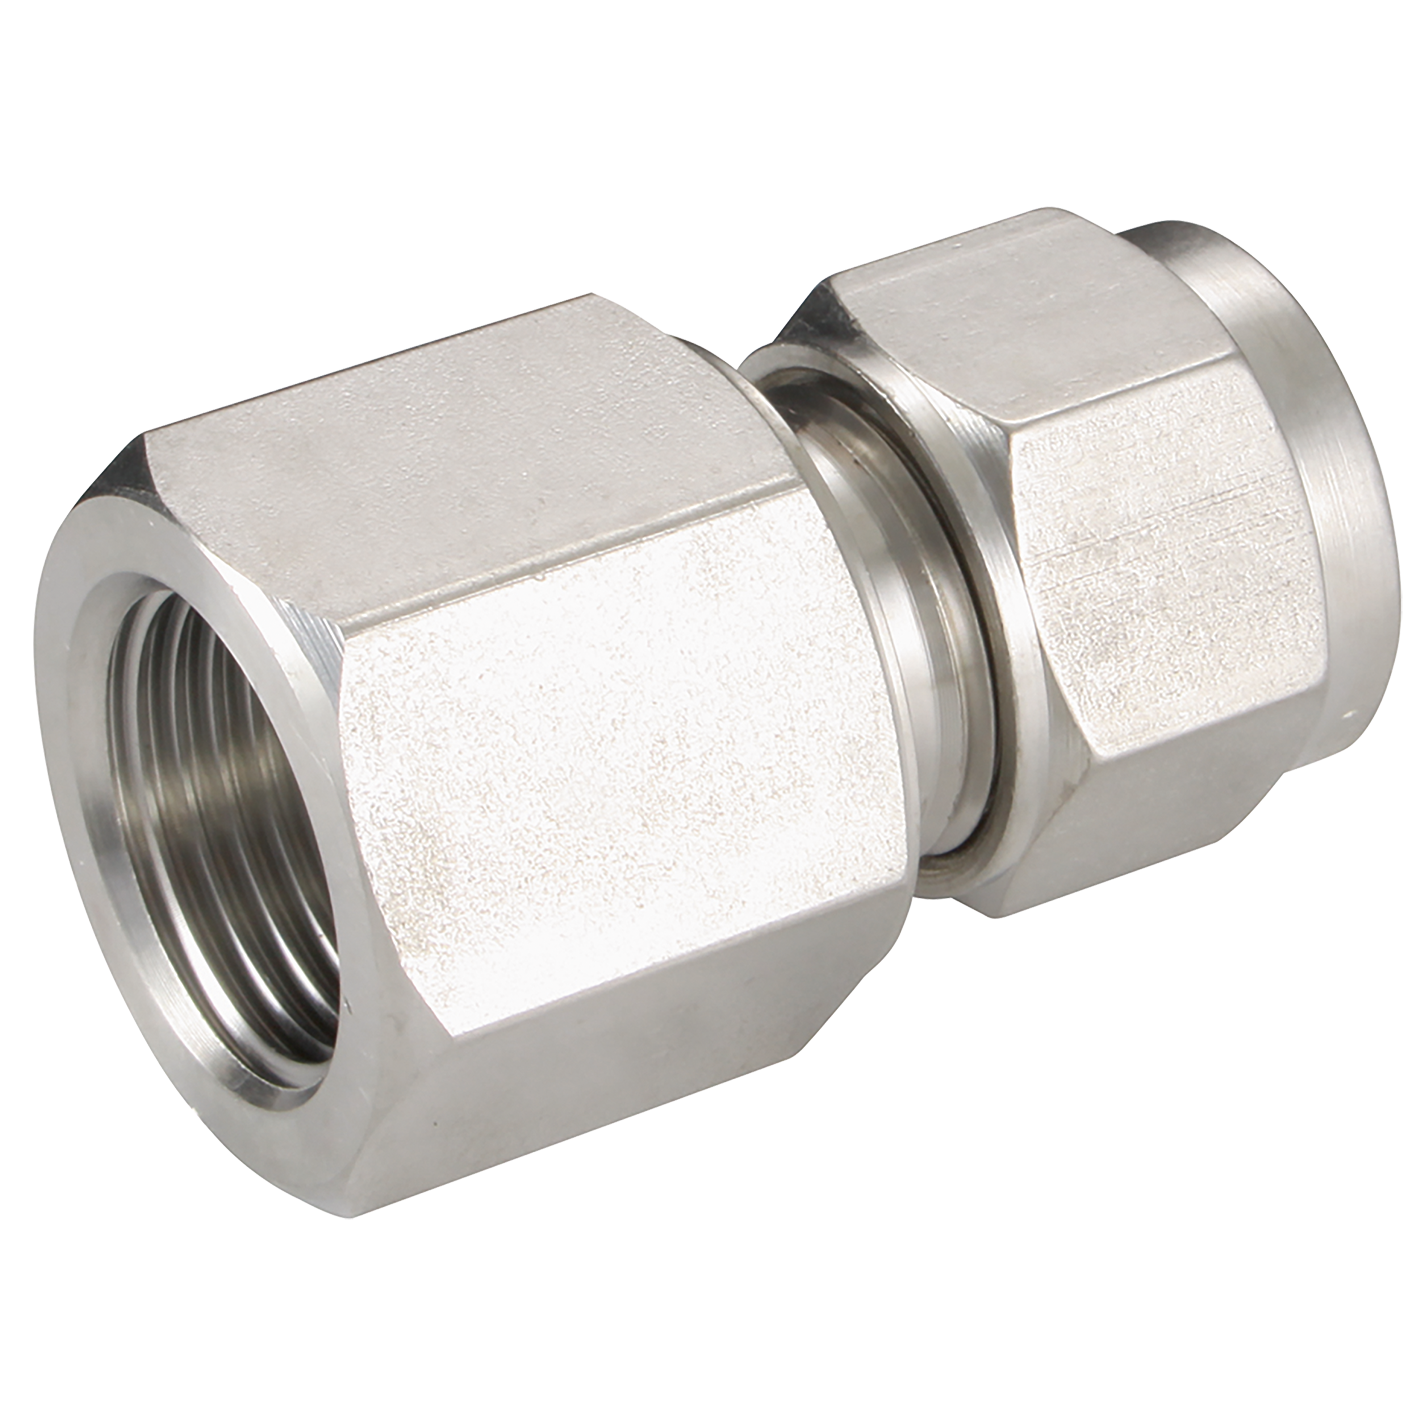 FEMALE ISO CONNECTOR 1/2 OD 1/4 BSPT